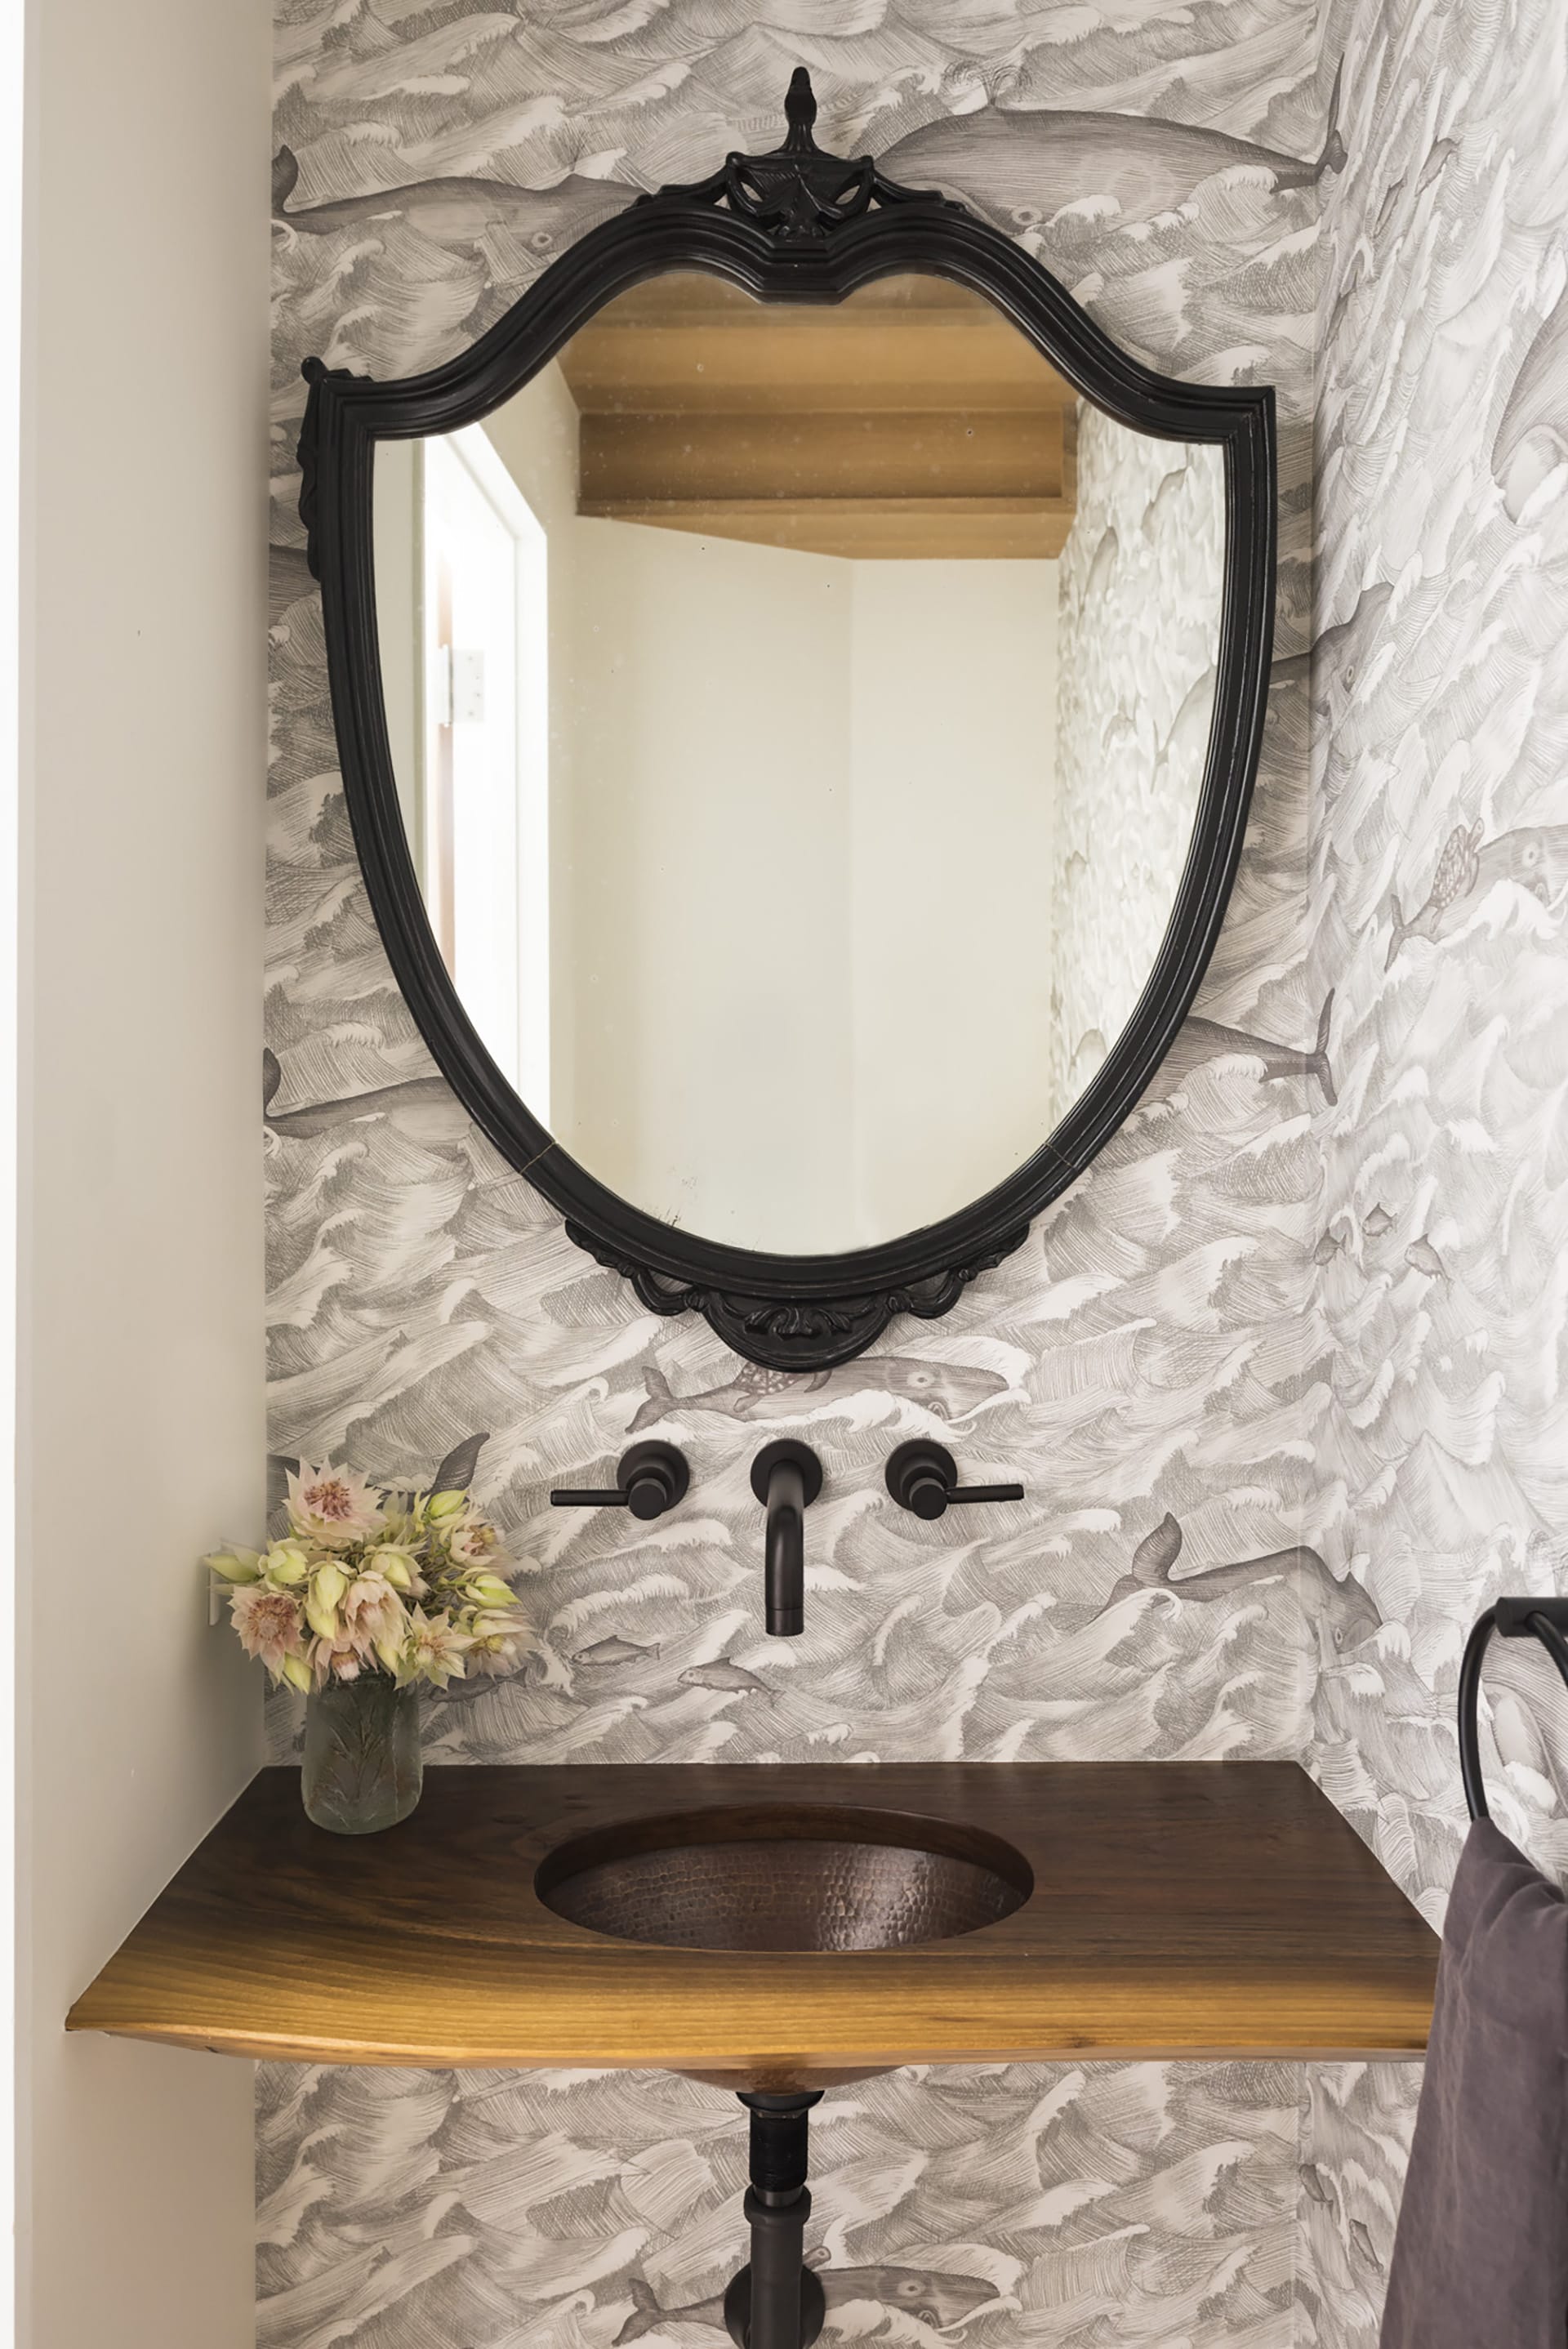 Sink and mirror in an under-staircase powder room with black and white whale wallpaper